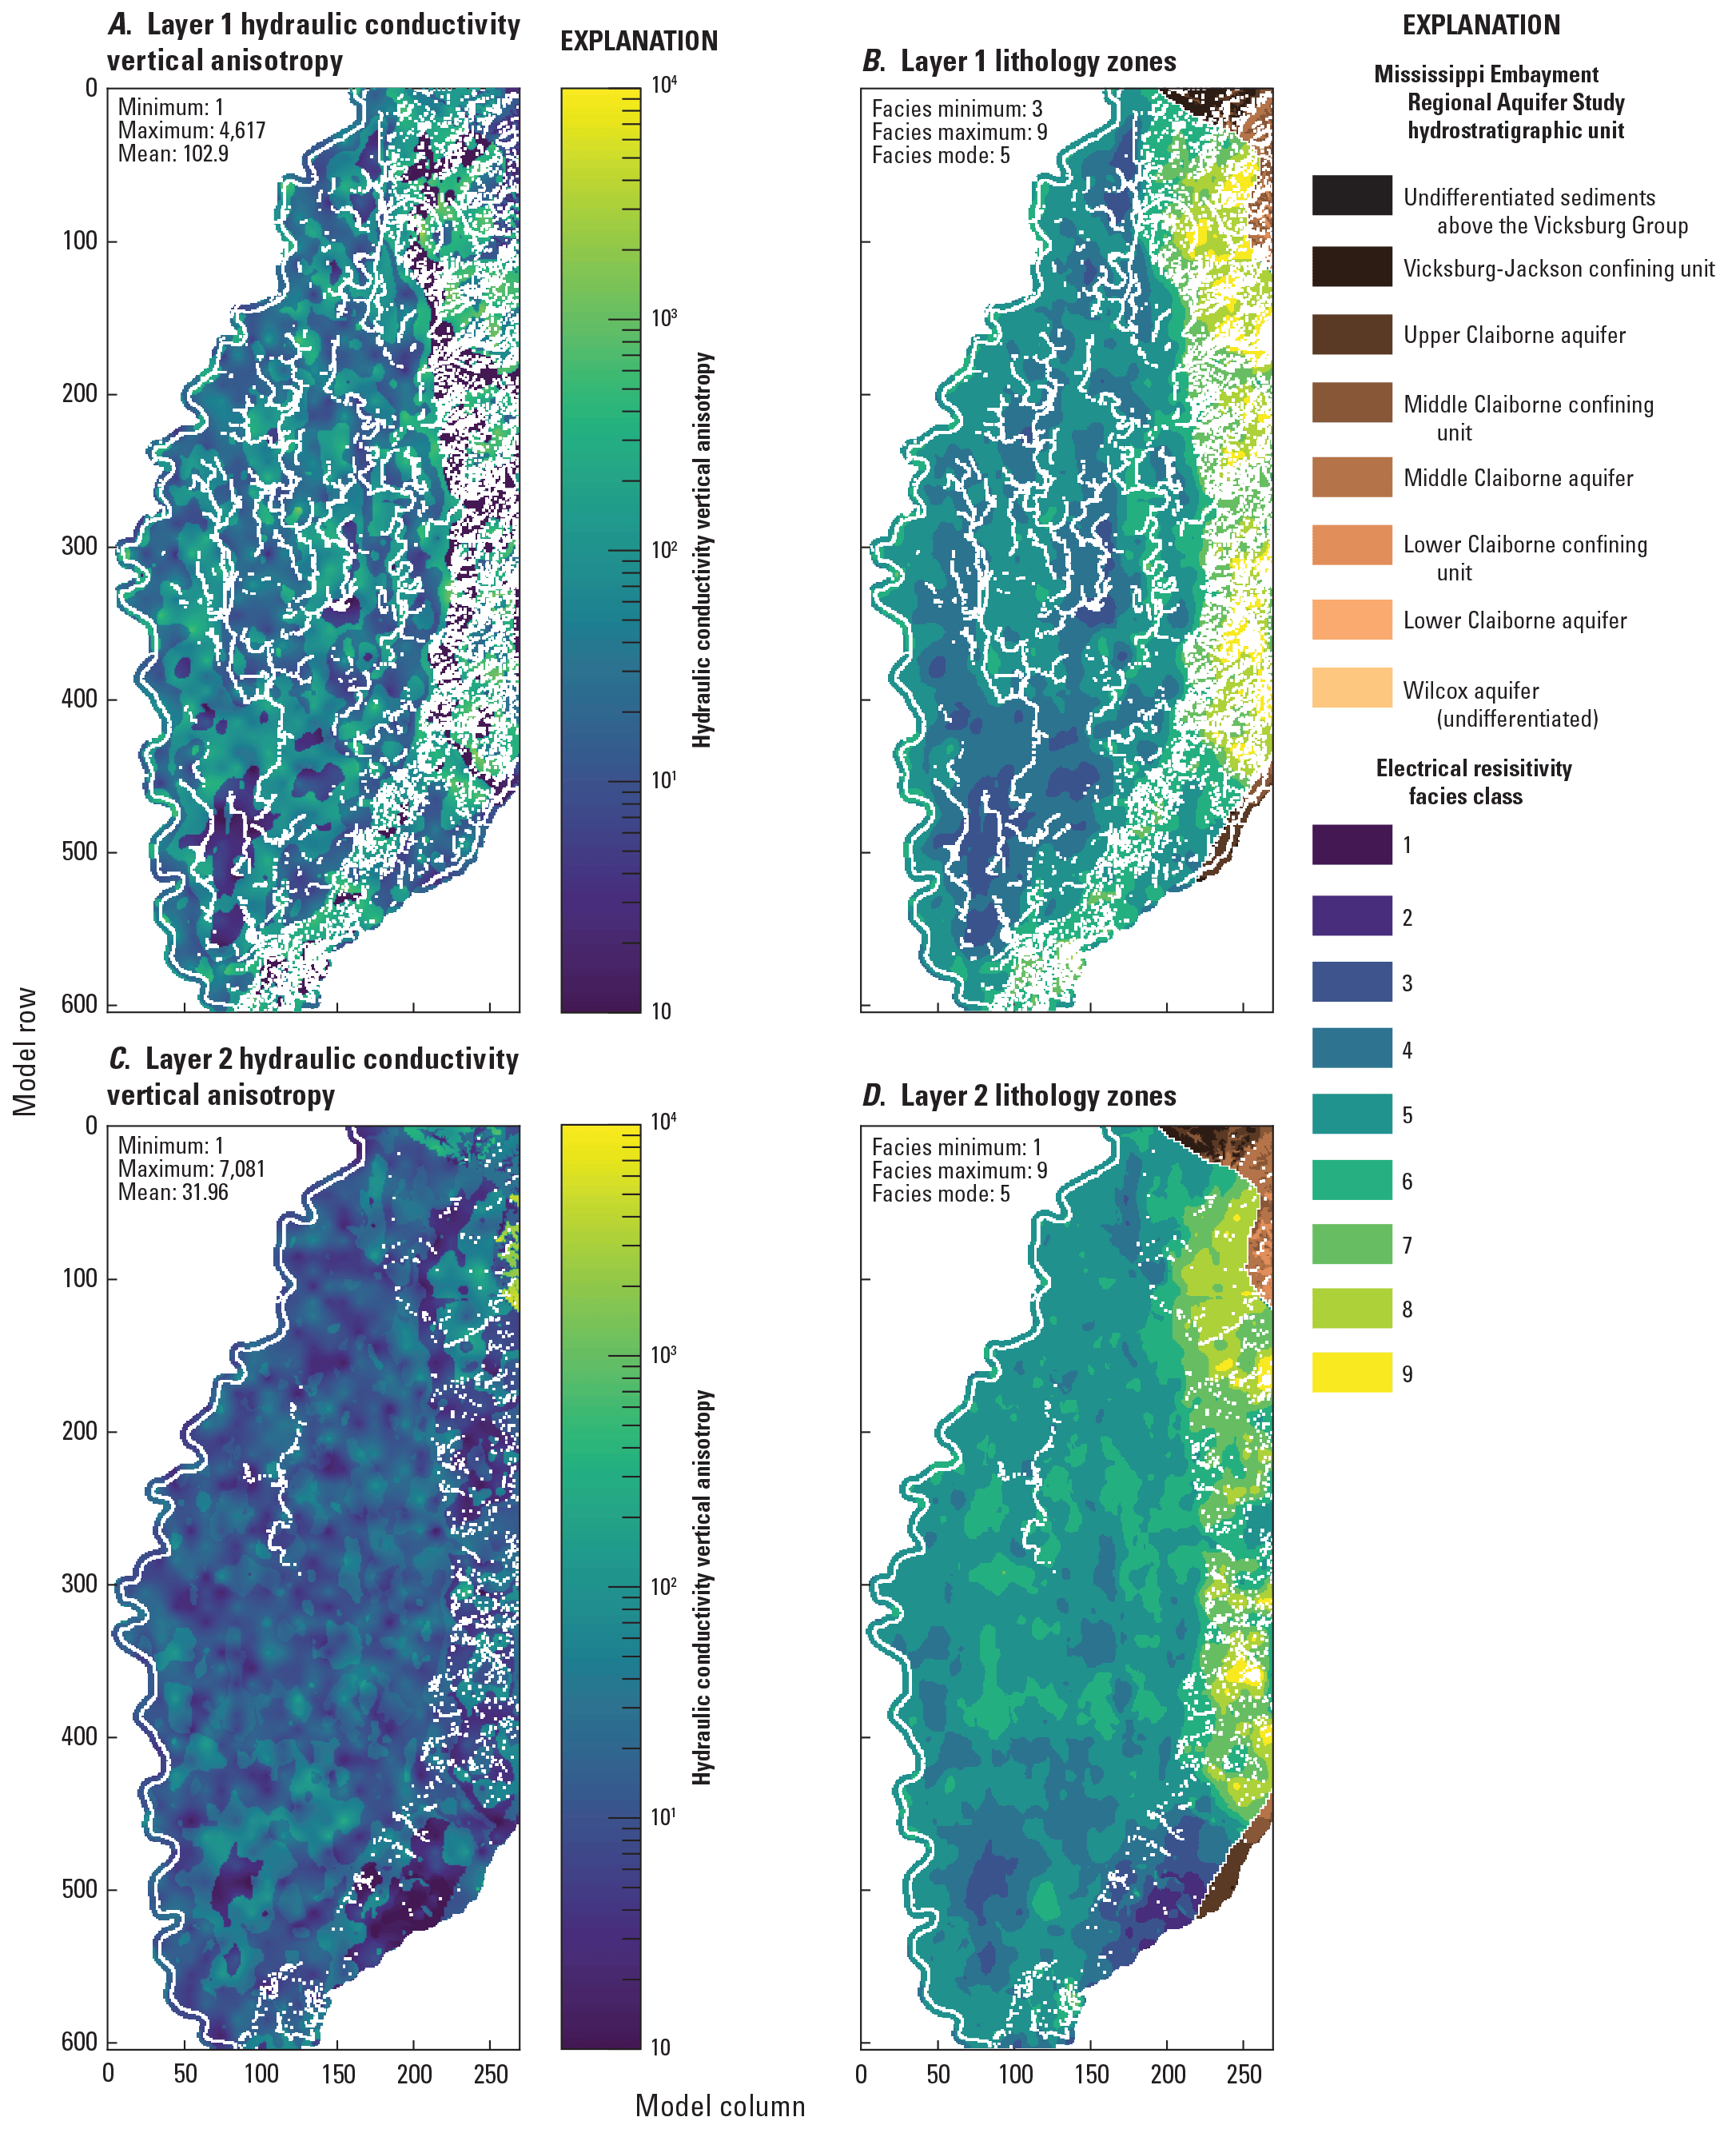 Values in the alluvial aquifer range from 1 to 10,000, with mean values in individual
                     layers ranging from about 32 to 140. Values in the upper part of the Tertiary units
                     covered by the AEM survey range from 1 to 10,000, with layer means ranging from about
                     35 to 160.